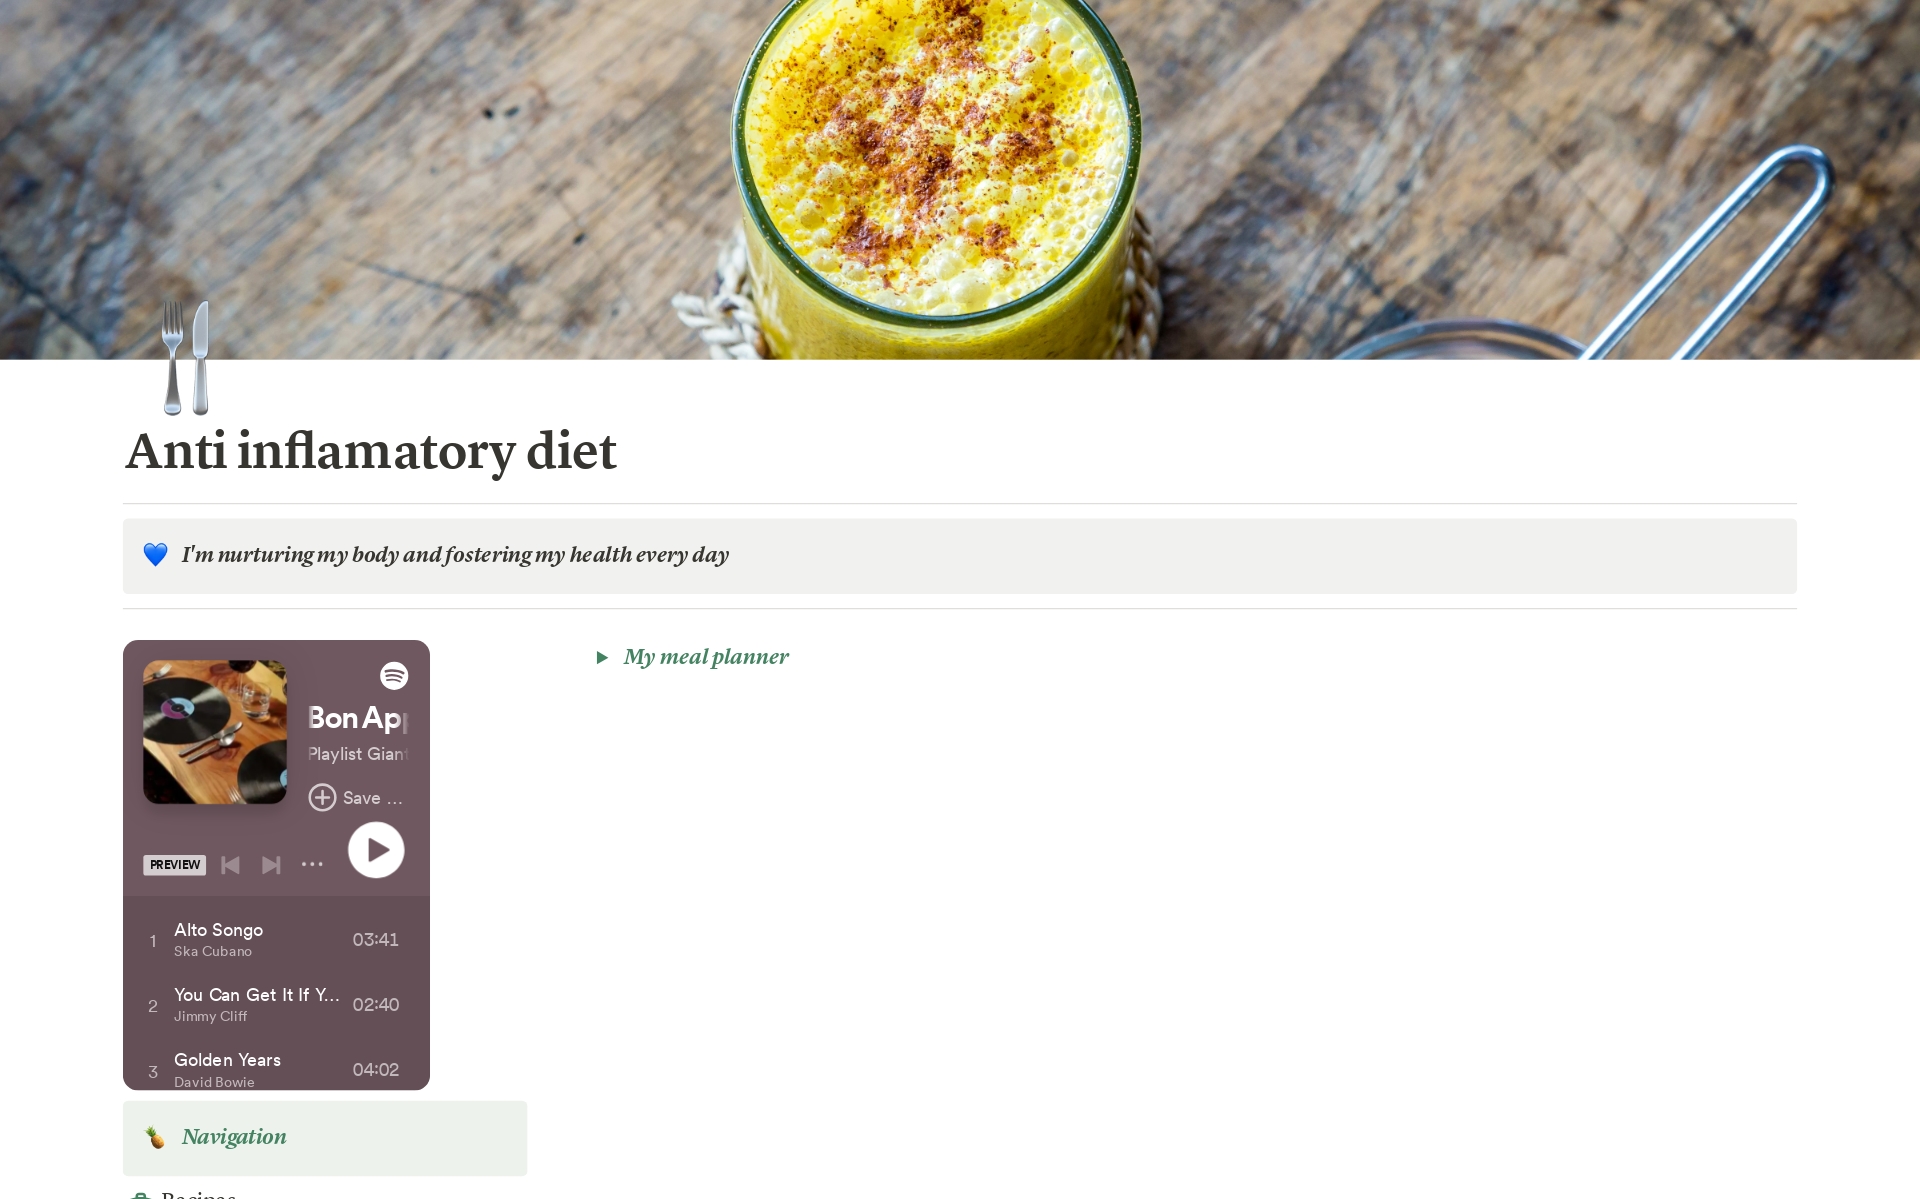 Anti inflamatory diet meal & recipe planner notion template